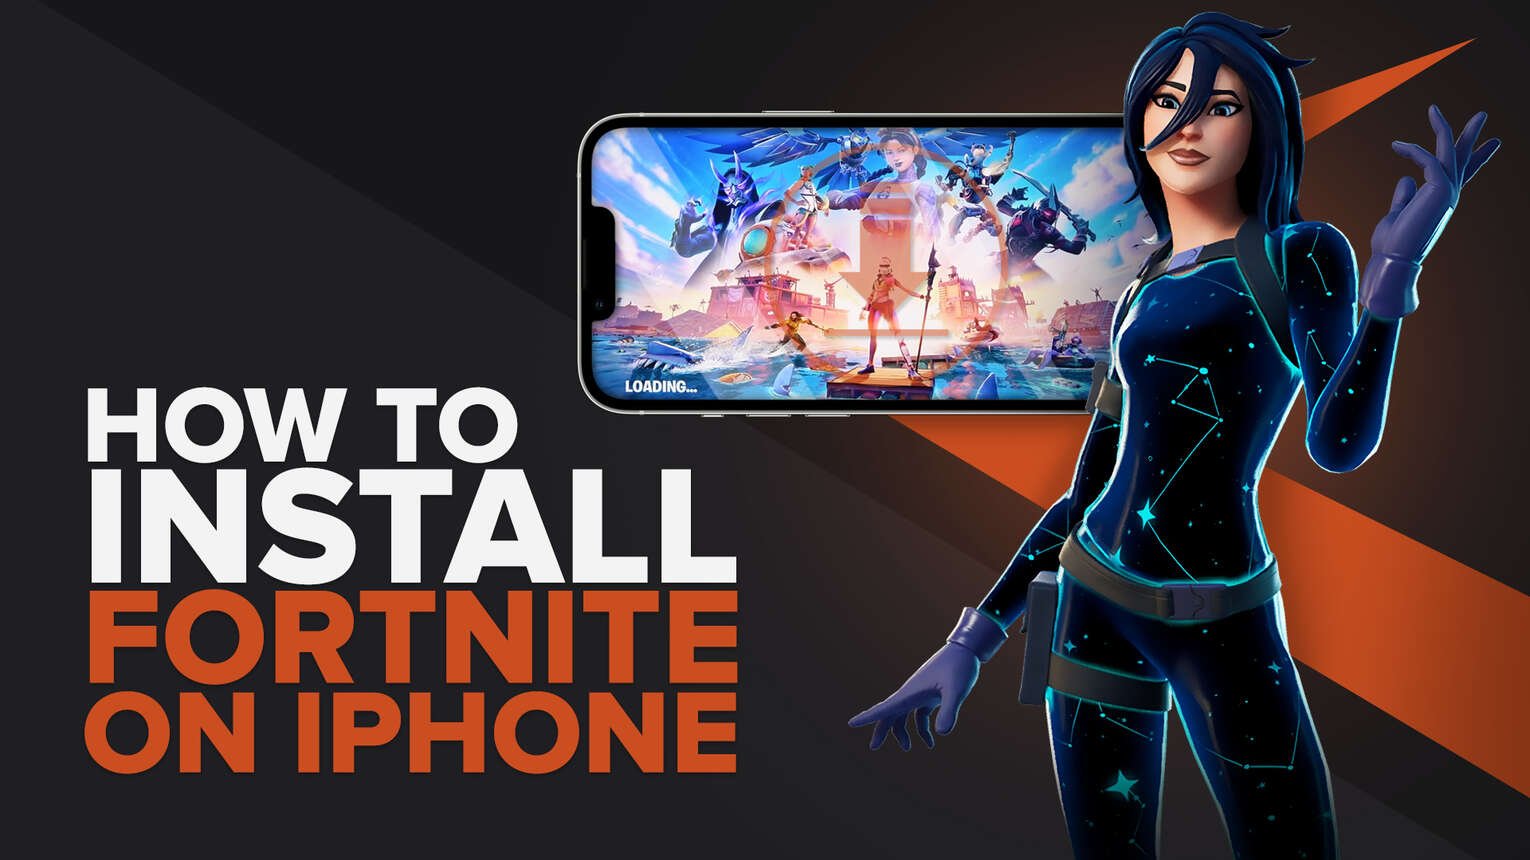 How To Install Fortnite on iPhone [3 Ways]